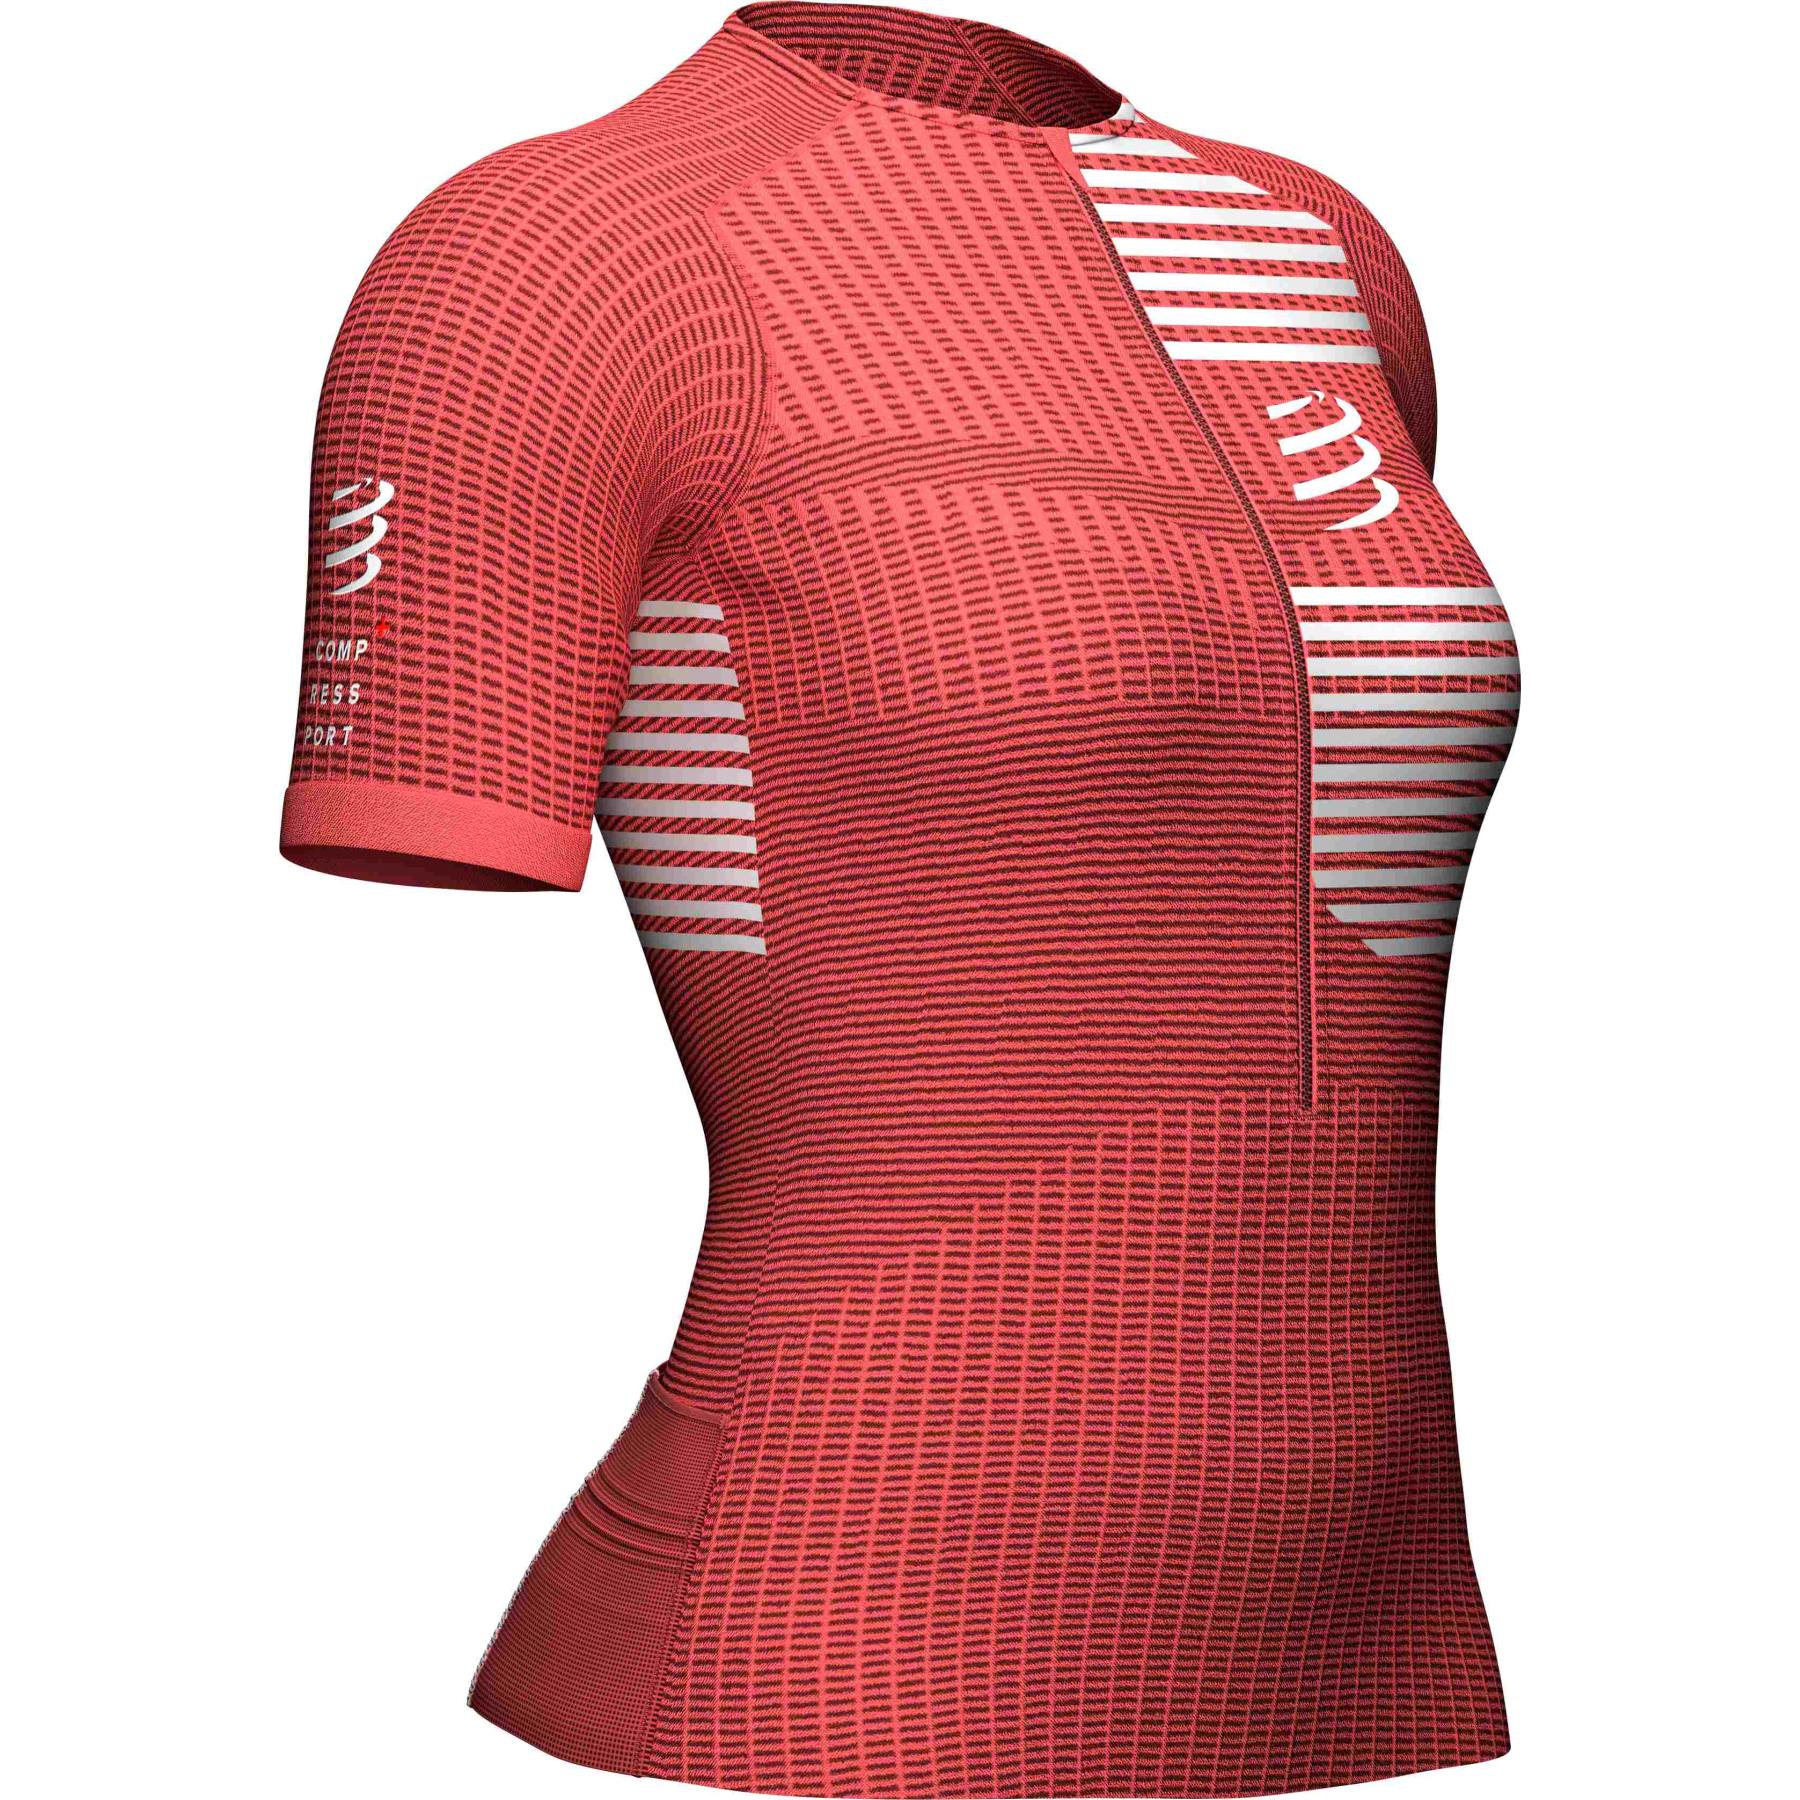 Picture of Compressport Tri Postural Short Sleeve Top Women - coral